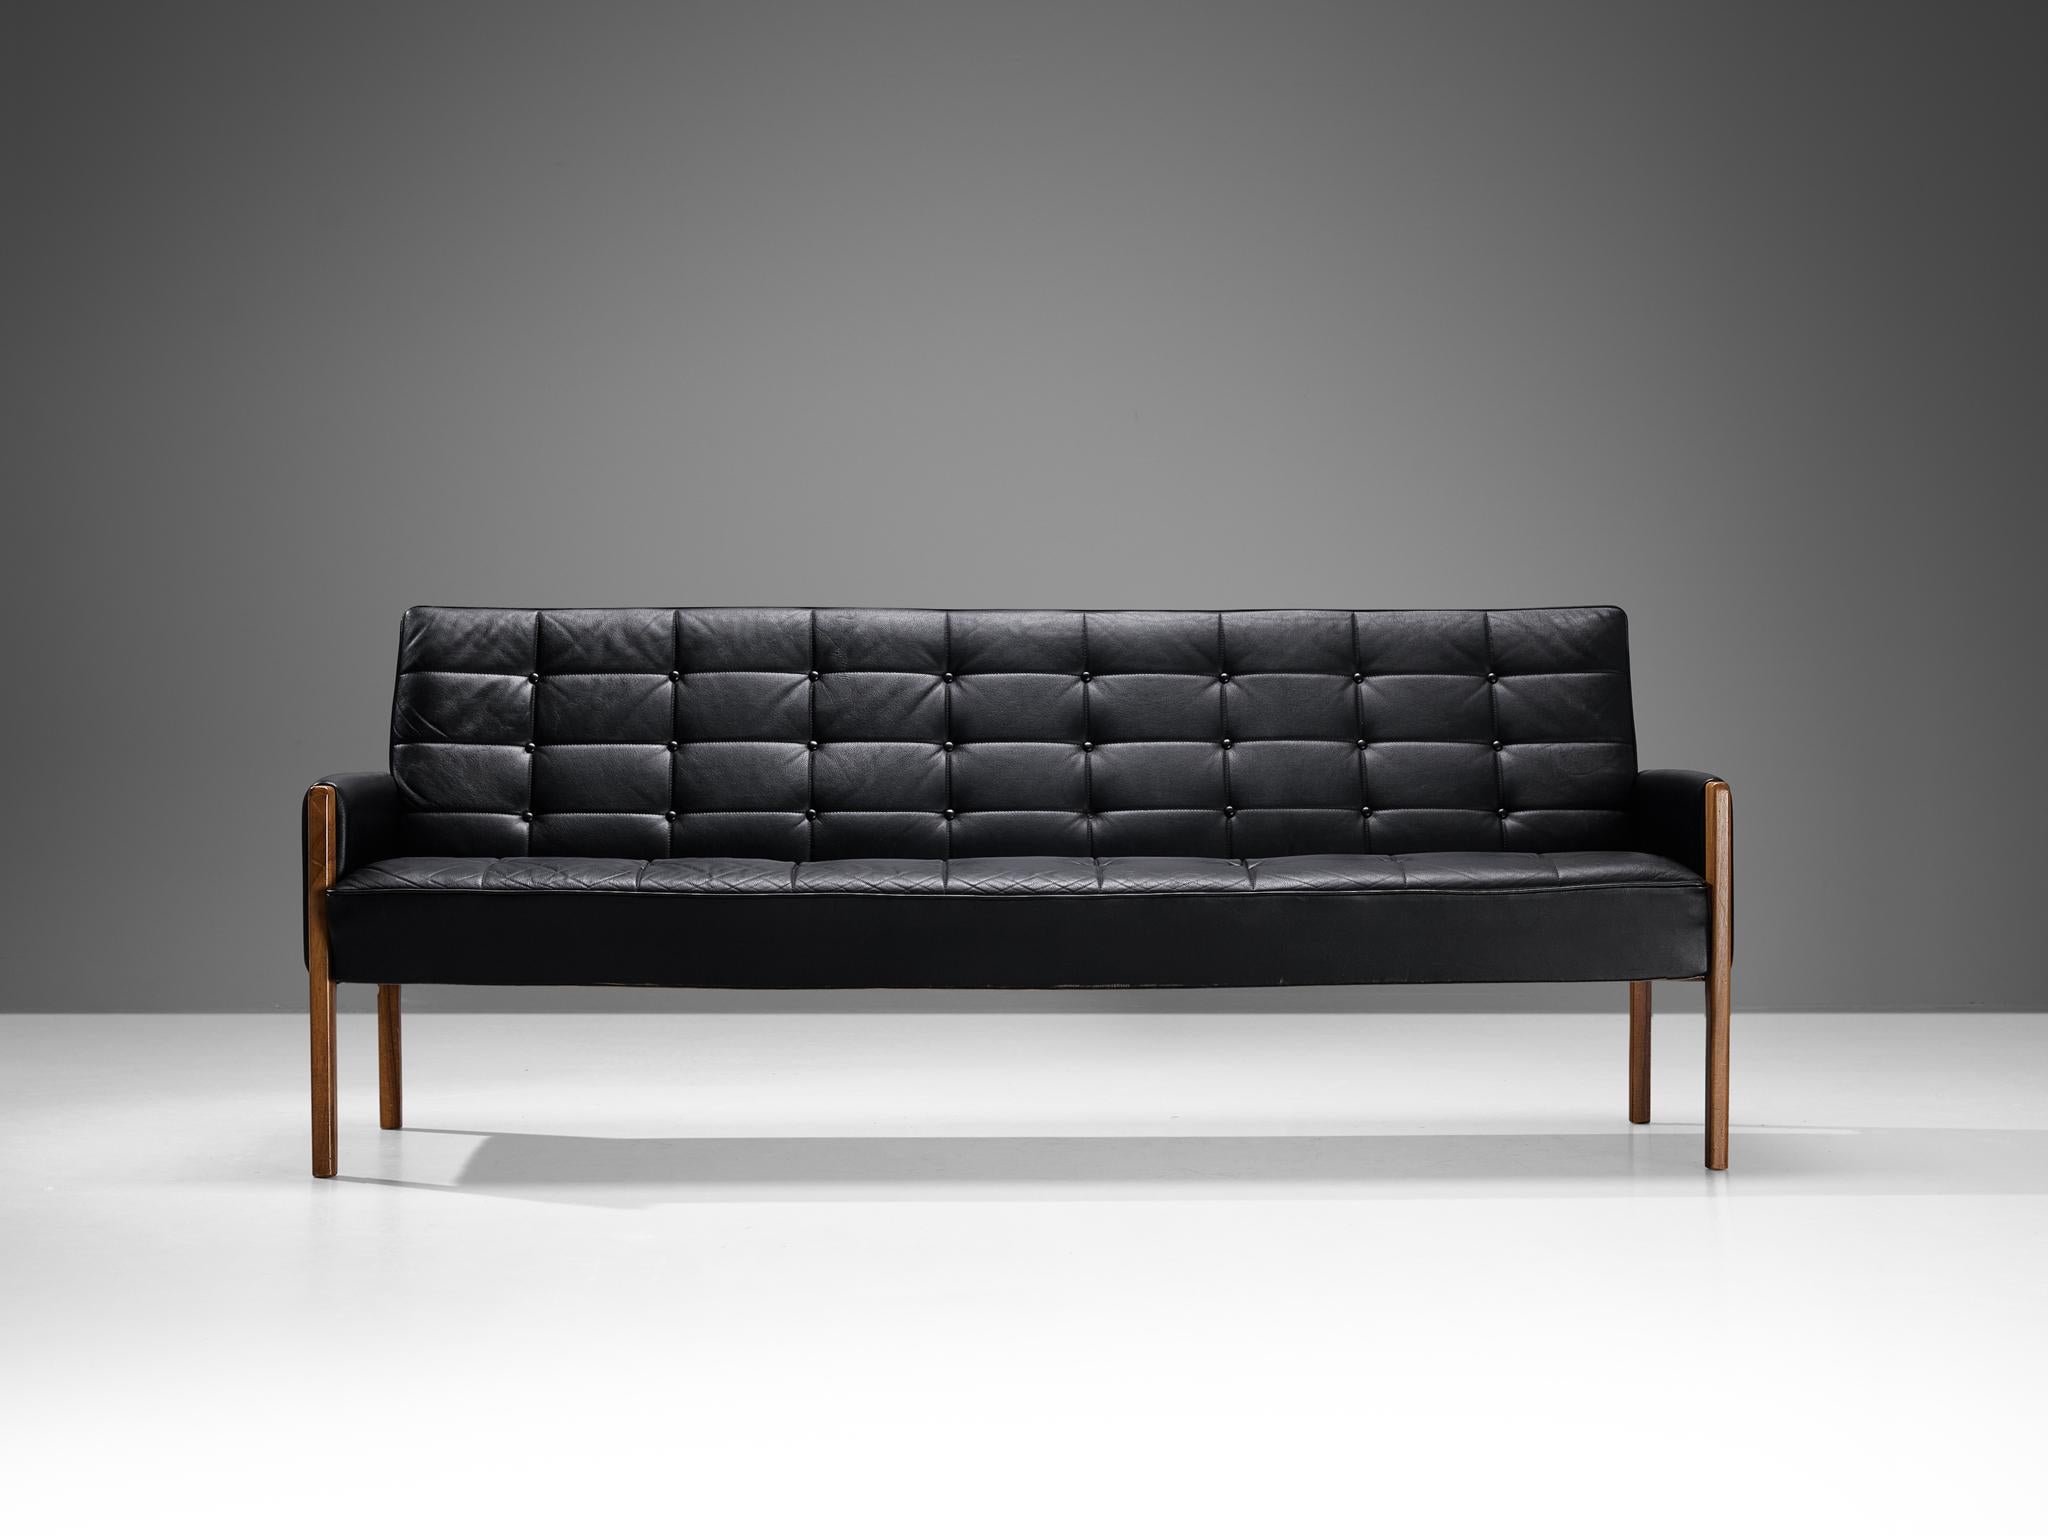 Mid-20th Century Scandinavian Modern Sofa in Walnut and Black Upholstery  For Sale